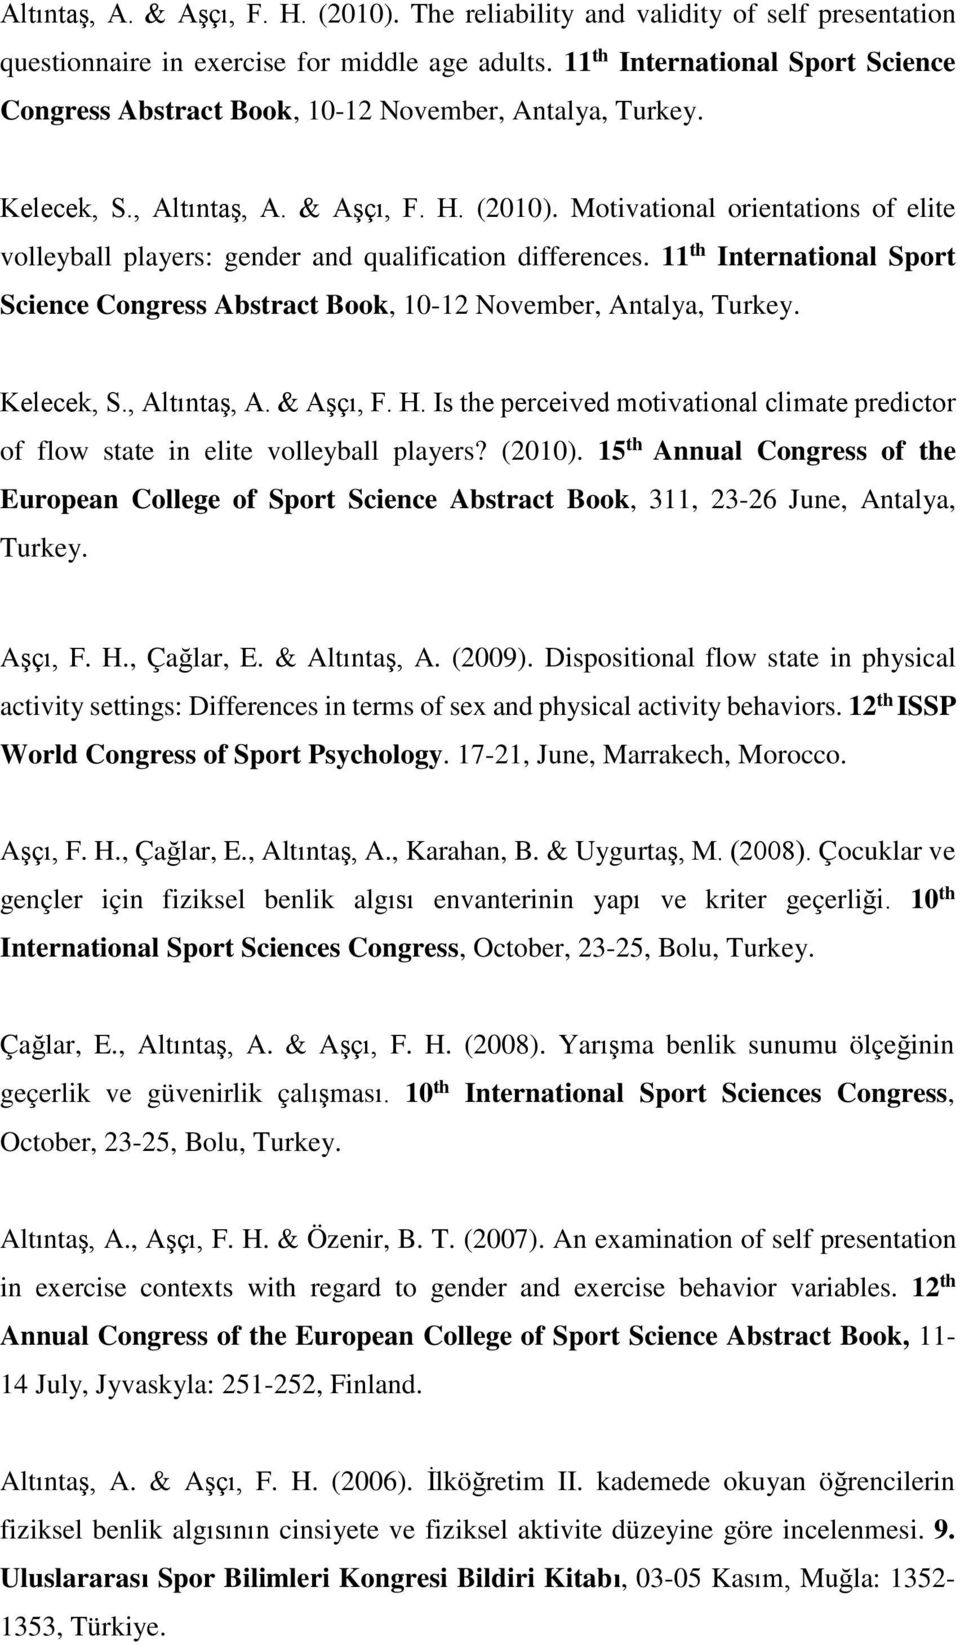 Motivational orientations of elite volleyball players: gender and qualification differences. 11 th International Sport Science Congress Abstract Book, 10-12 November, Antalya, Turkey. Kelecek, S.